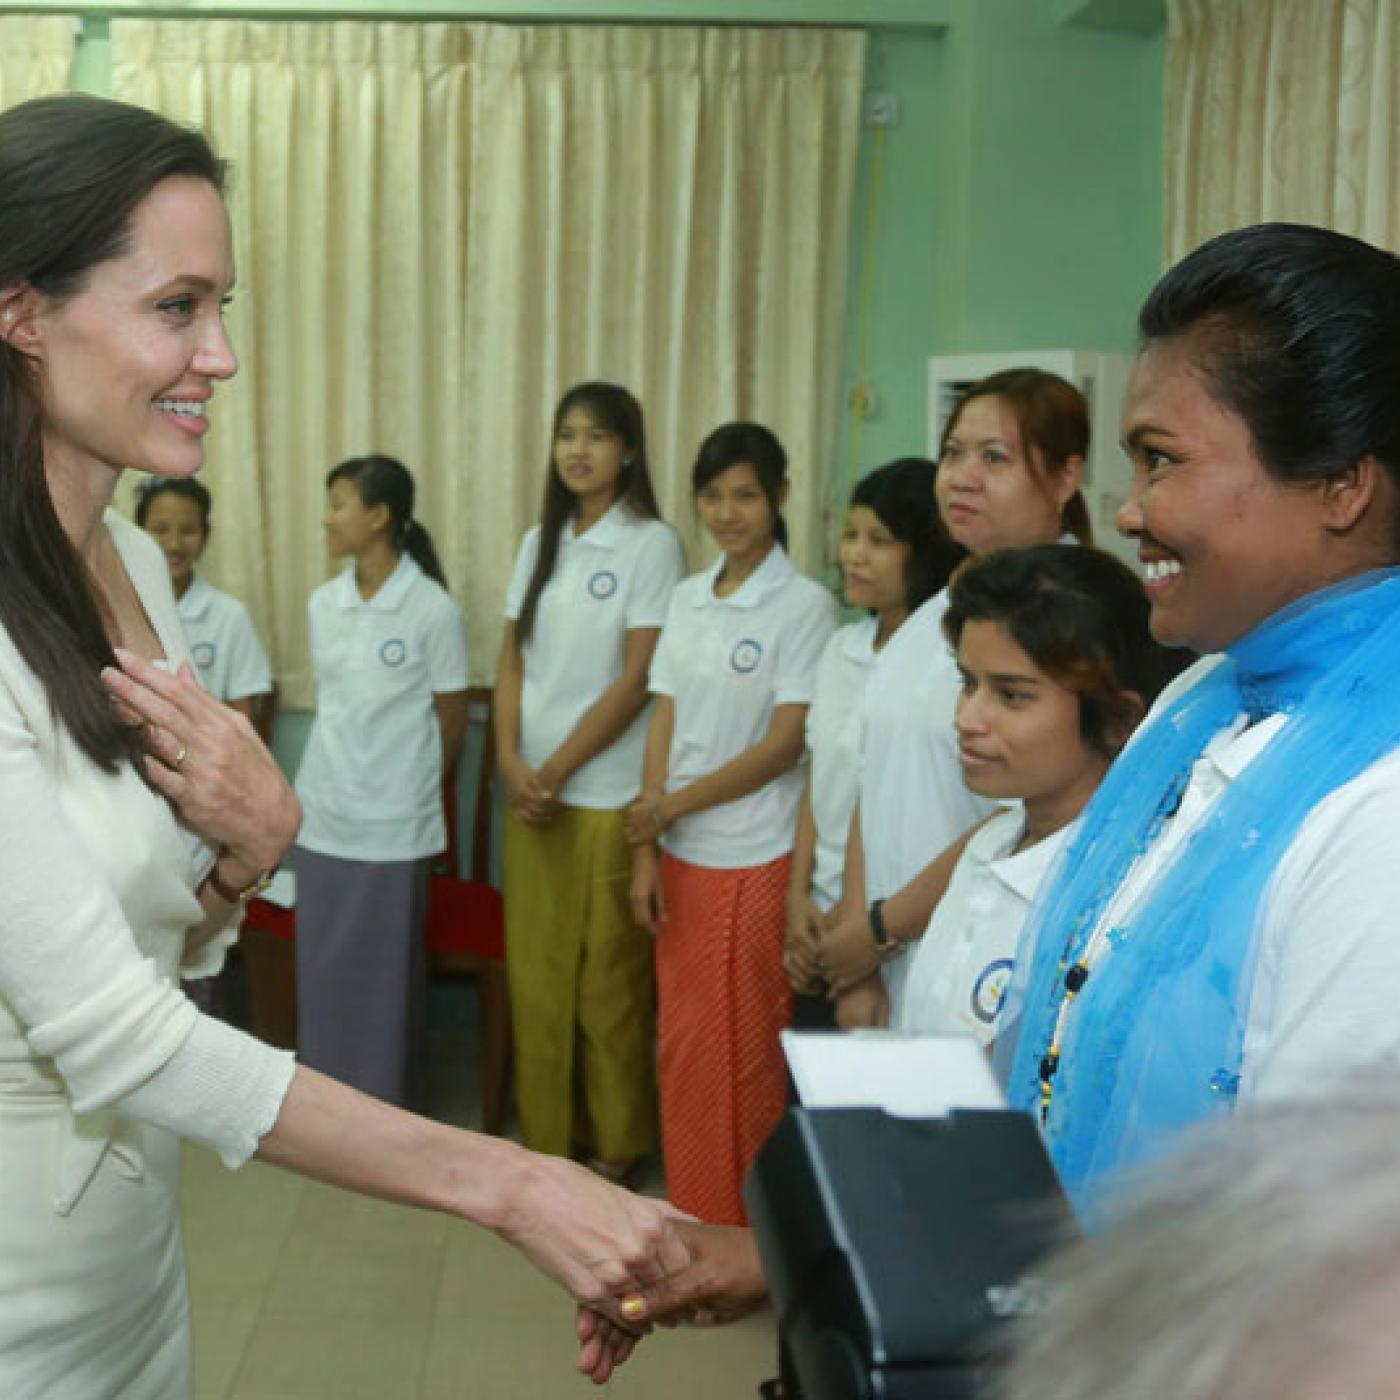 Angelina Jolie Meets with Participants of the IFES-Supported She Leads Program in Myanmar